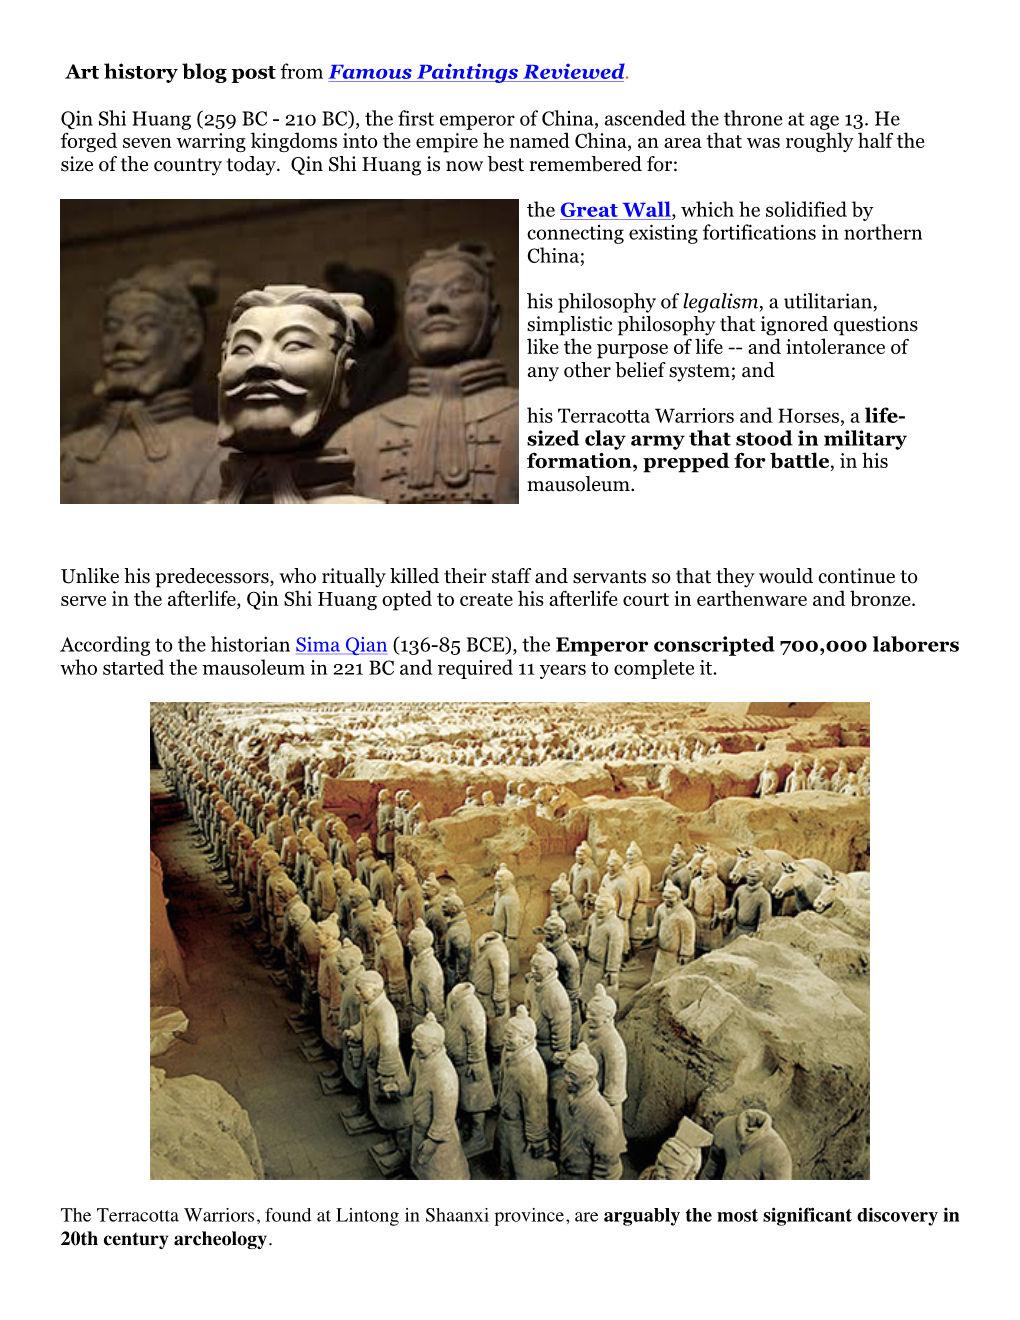 Art History Blog Post from Famous Paintings Reviewed. Qin Shi Huang